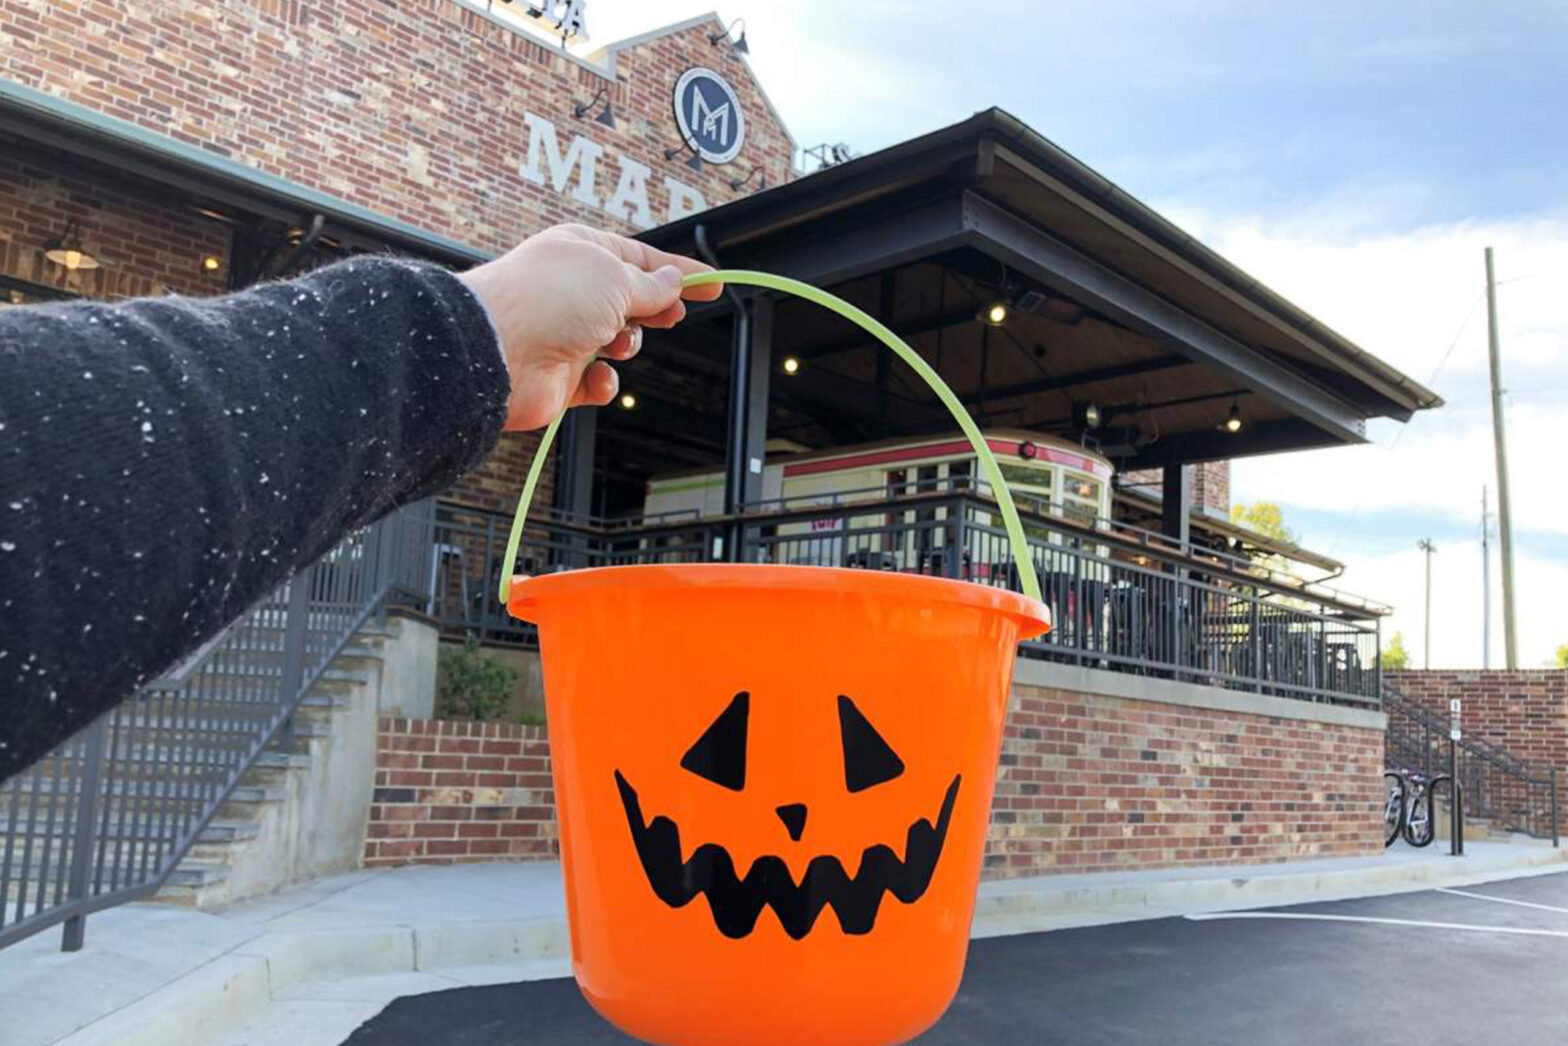 Halloween Bucket at Marietta Square Market - Spooky delights and cheap eating places near me await in Marietta, Georgia.